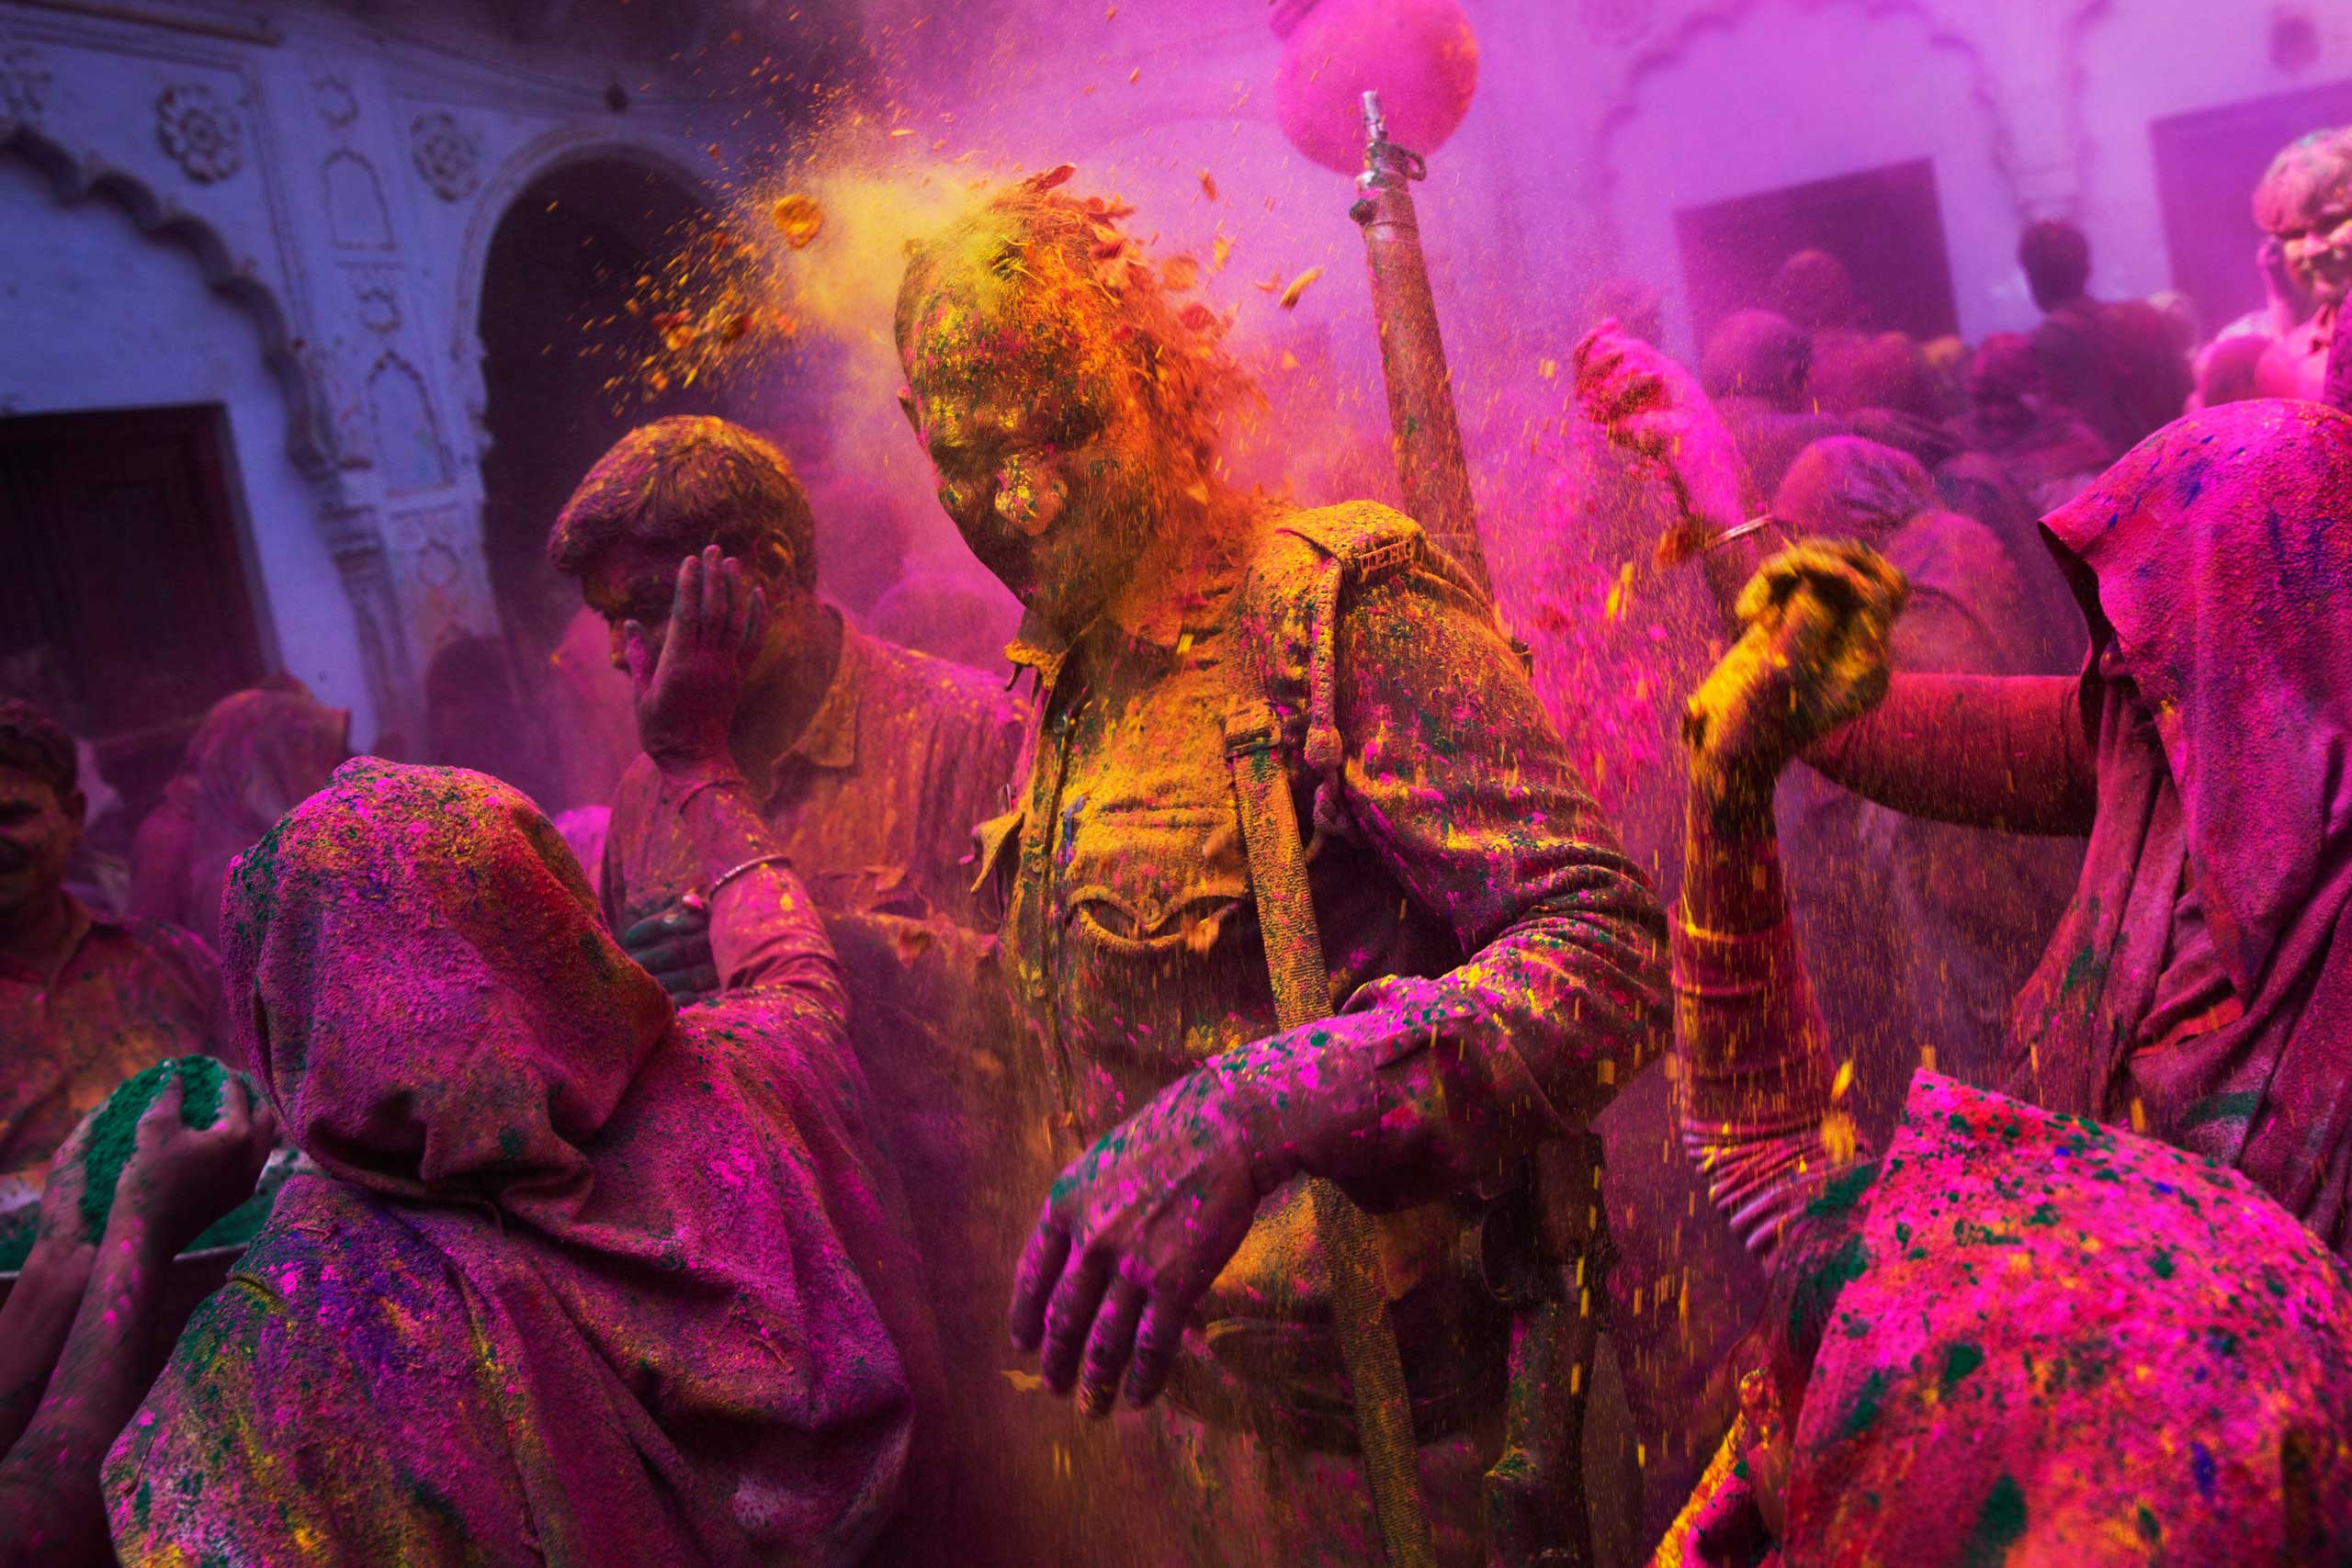 Hindu widows throw colored powder on an Indian policeman as they celebrate Holi, the Hindu festival of colors, at the Meera Sahabhagini Widow Ashram in Vrindavan, India, March 3, 2015.